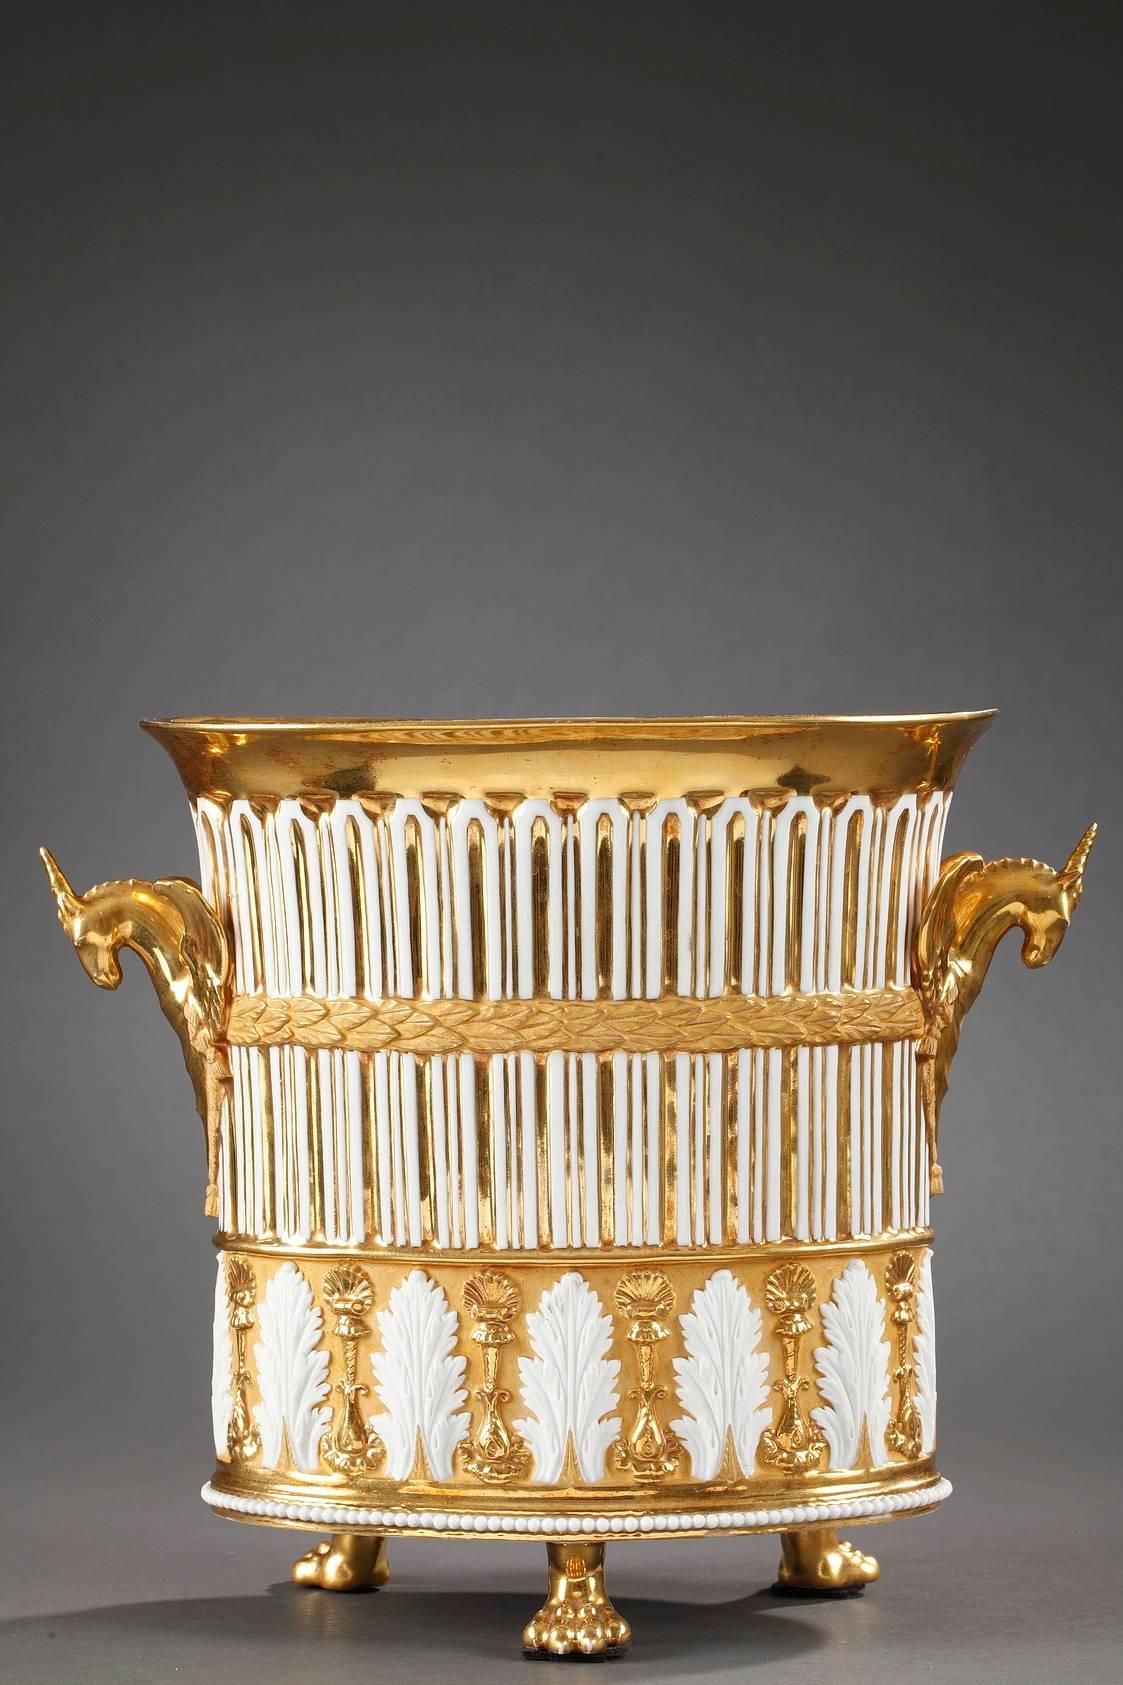 Vase-shaped mantel clock in gilded porcelain. Breguet hands track the hours and minutes on white, enamel dial with hours marked in Roman numerals. The porcelain is interspaced with gilding to form fluting on the body, and below the fluting are